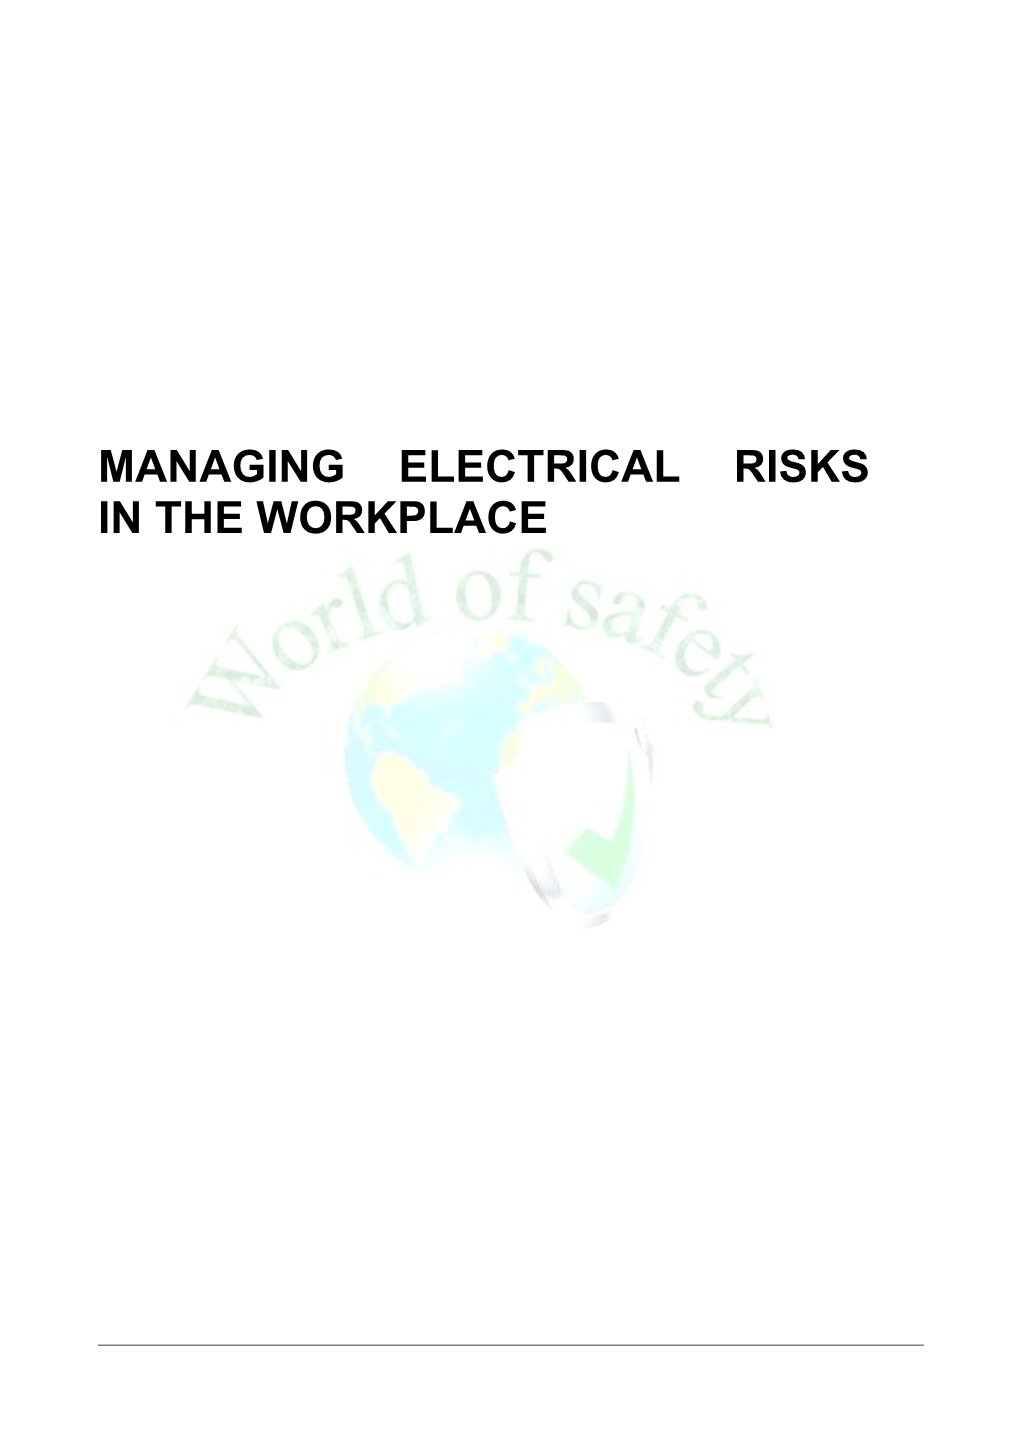 Managing Electrical Risks in the Workplace Code of Practice